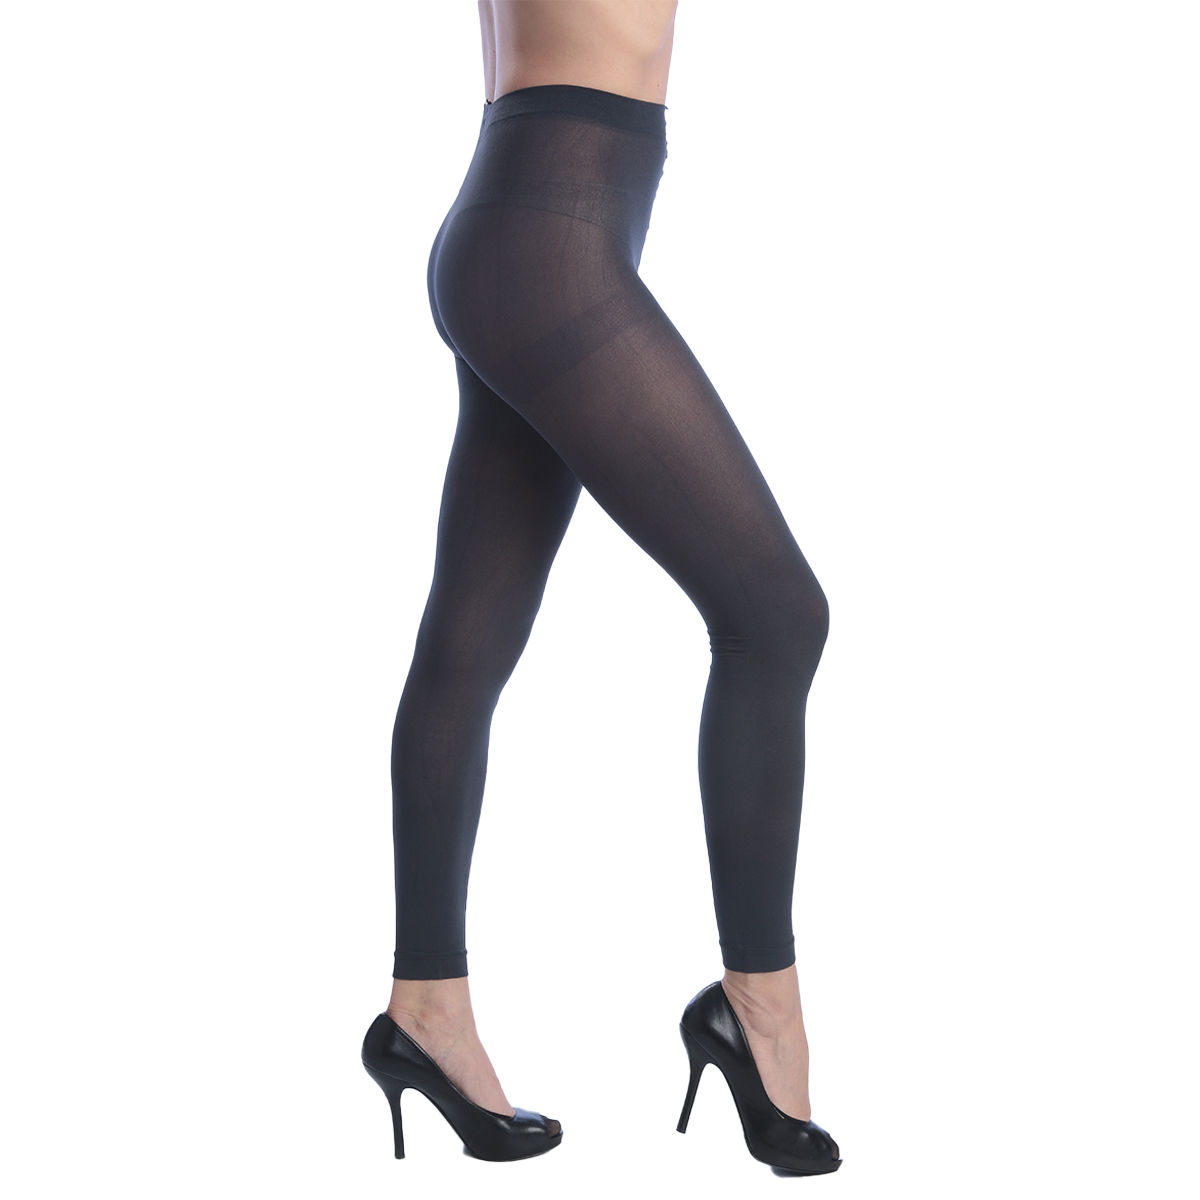 Bulk Women's Opaque Footless, Tights, Charcoal, Plus Size - DollarDays ...